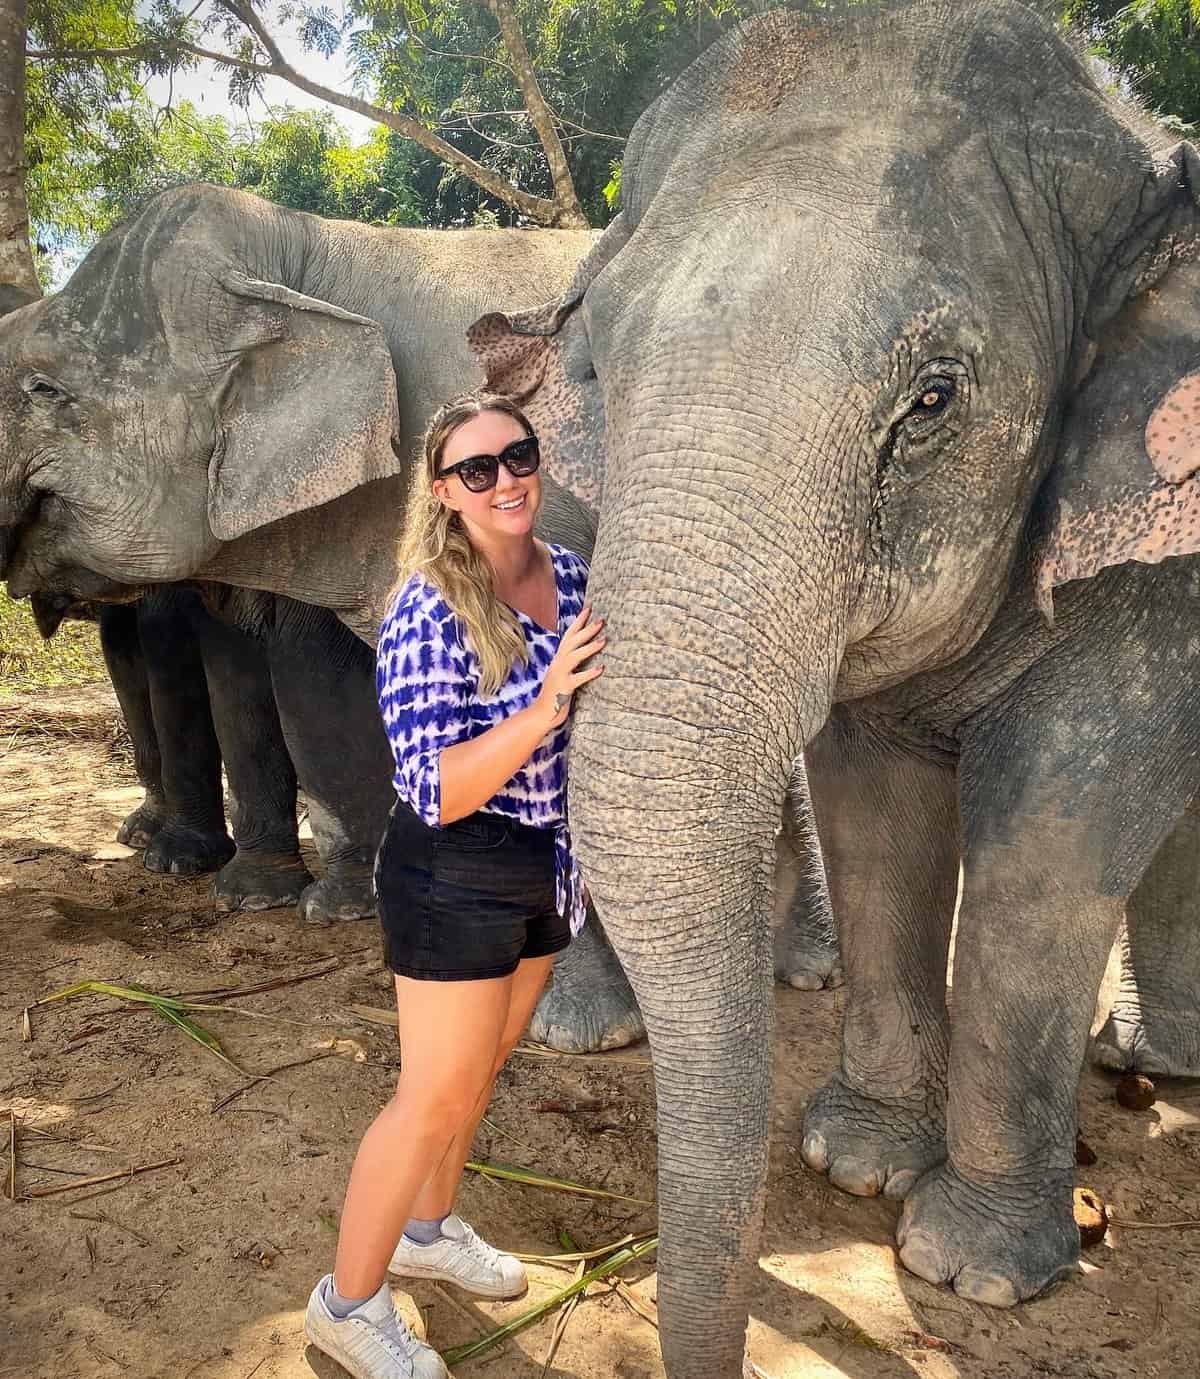 Jacqui standing and posing with elephants at the Angkor Wat elephant sanctuary in Cambodia.